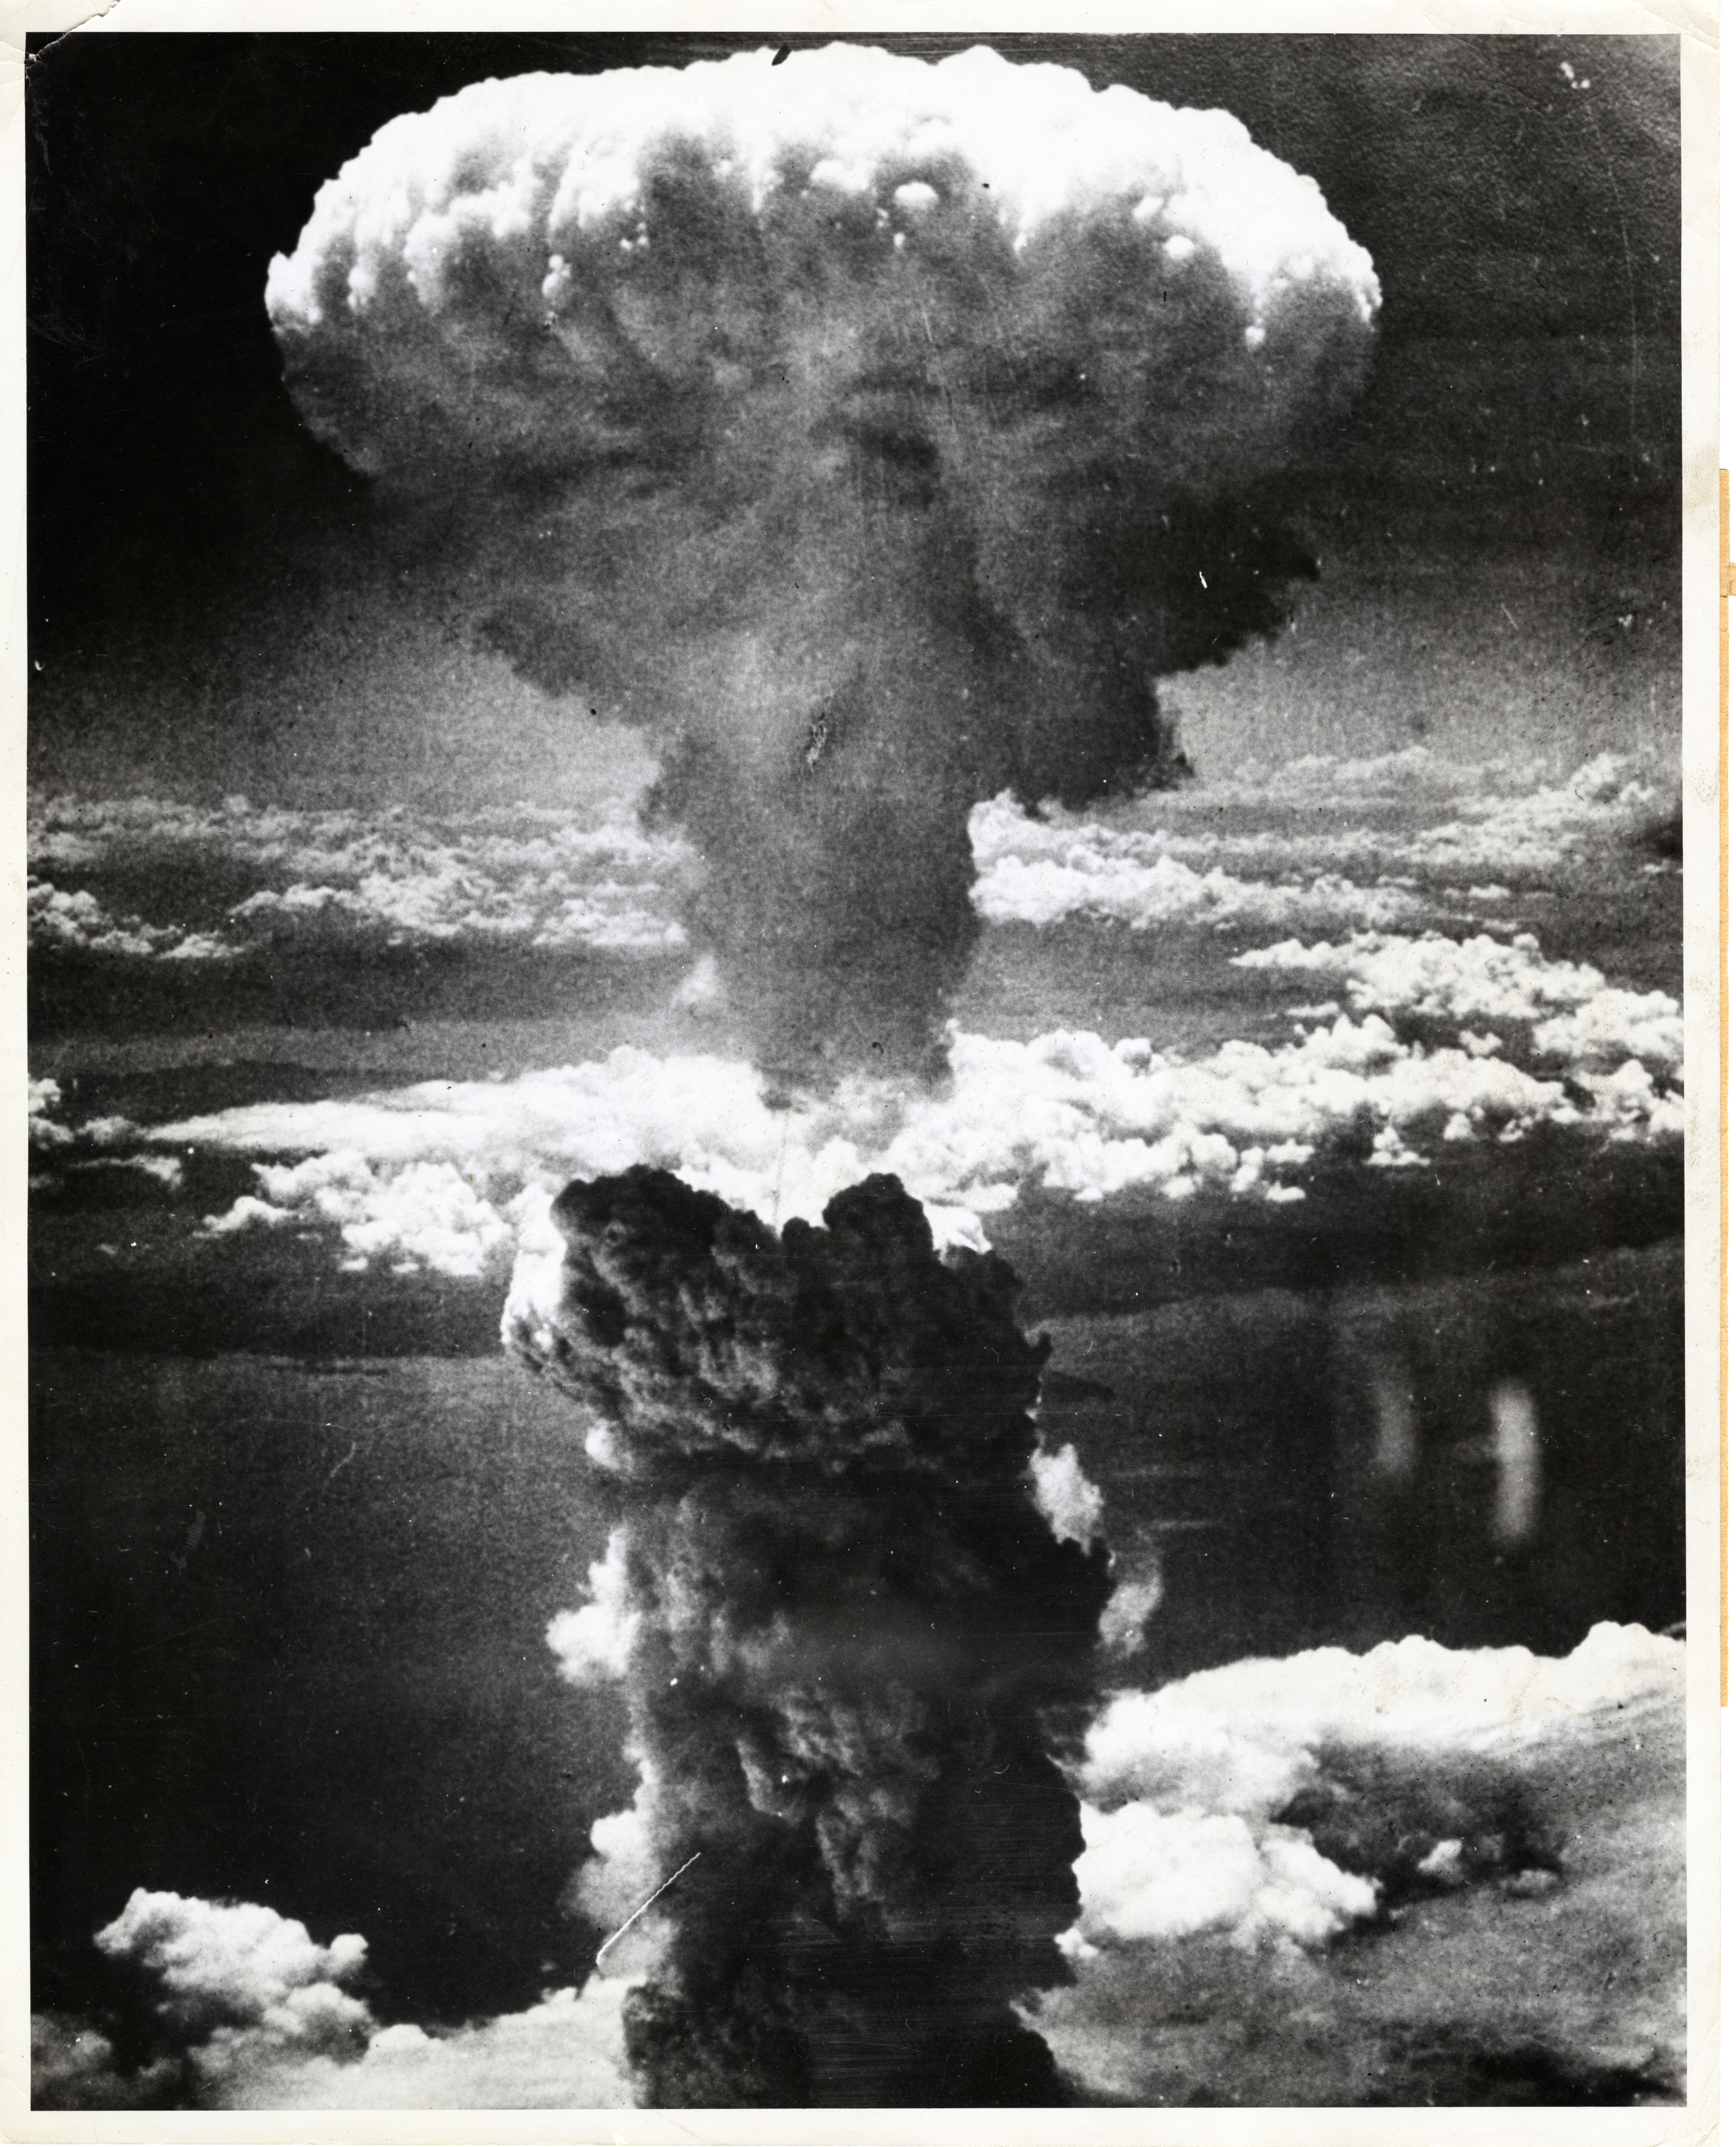 Mushroom Cloud Over Nagasaki Japan 9 August 1945 The Digital Collections Of The National Wwii Museum Oral Histories